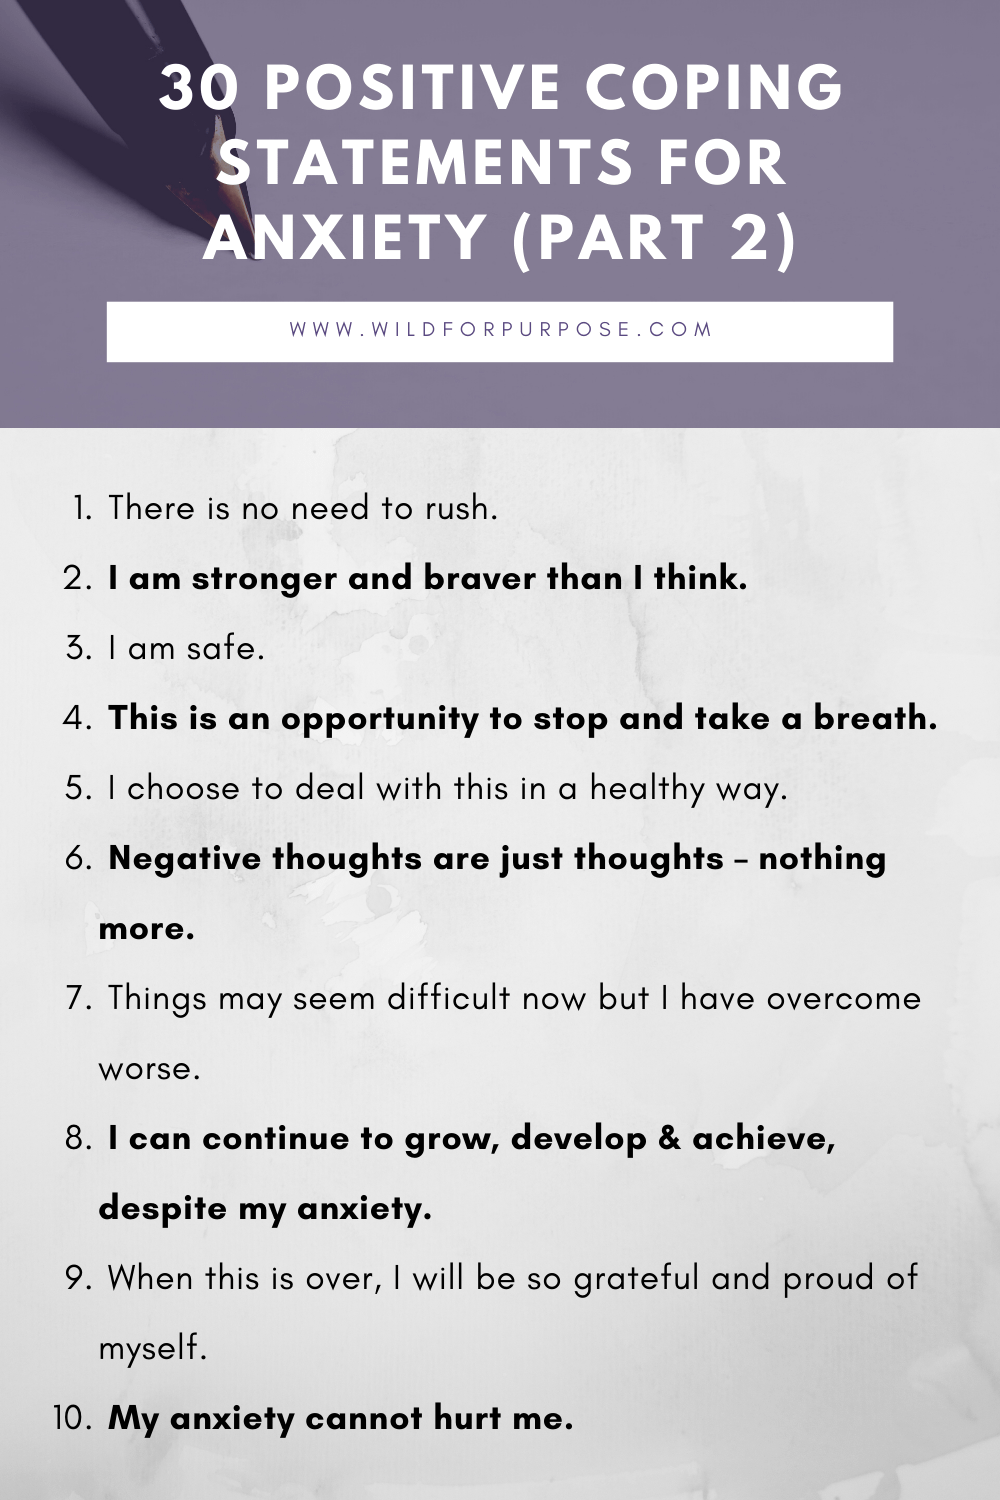 30 Positive Coping Statements For Anxiety, Image Part 2